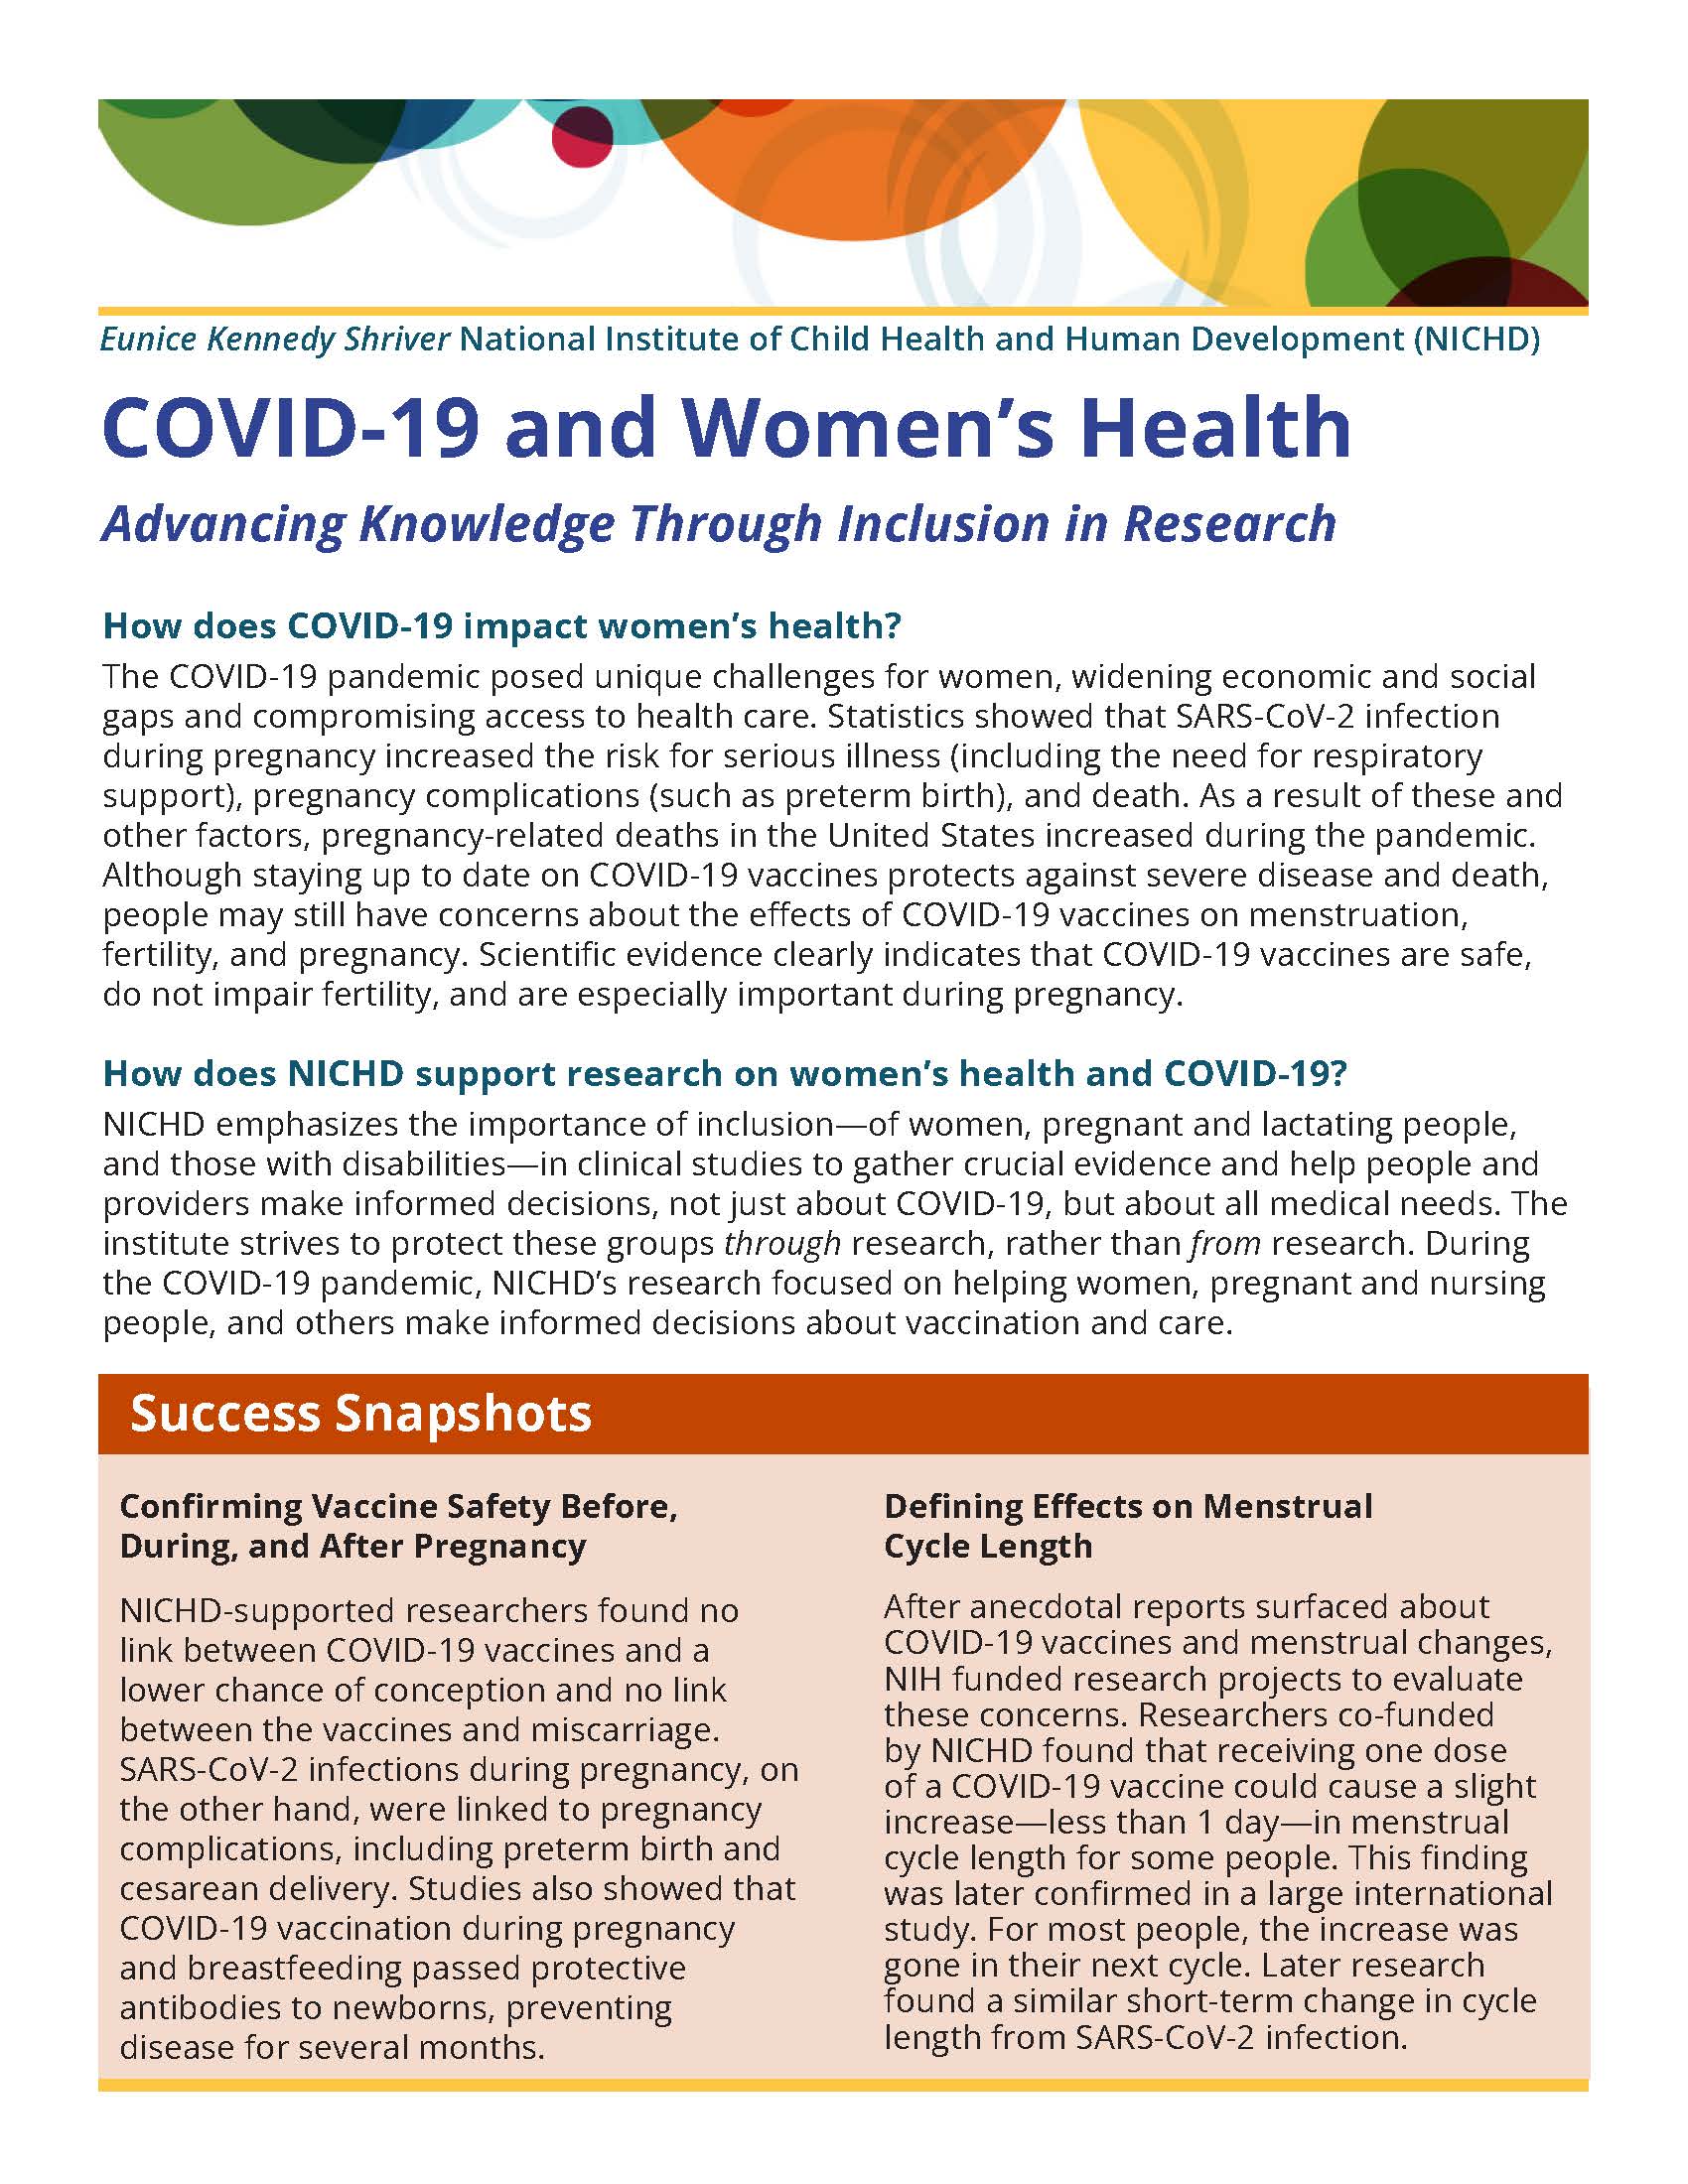 Front of the NICHD "COVID-19 and Women's Health" Fact Sheet